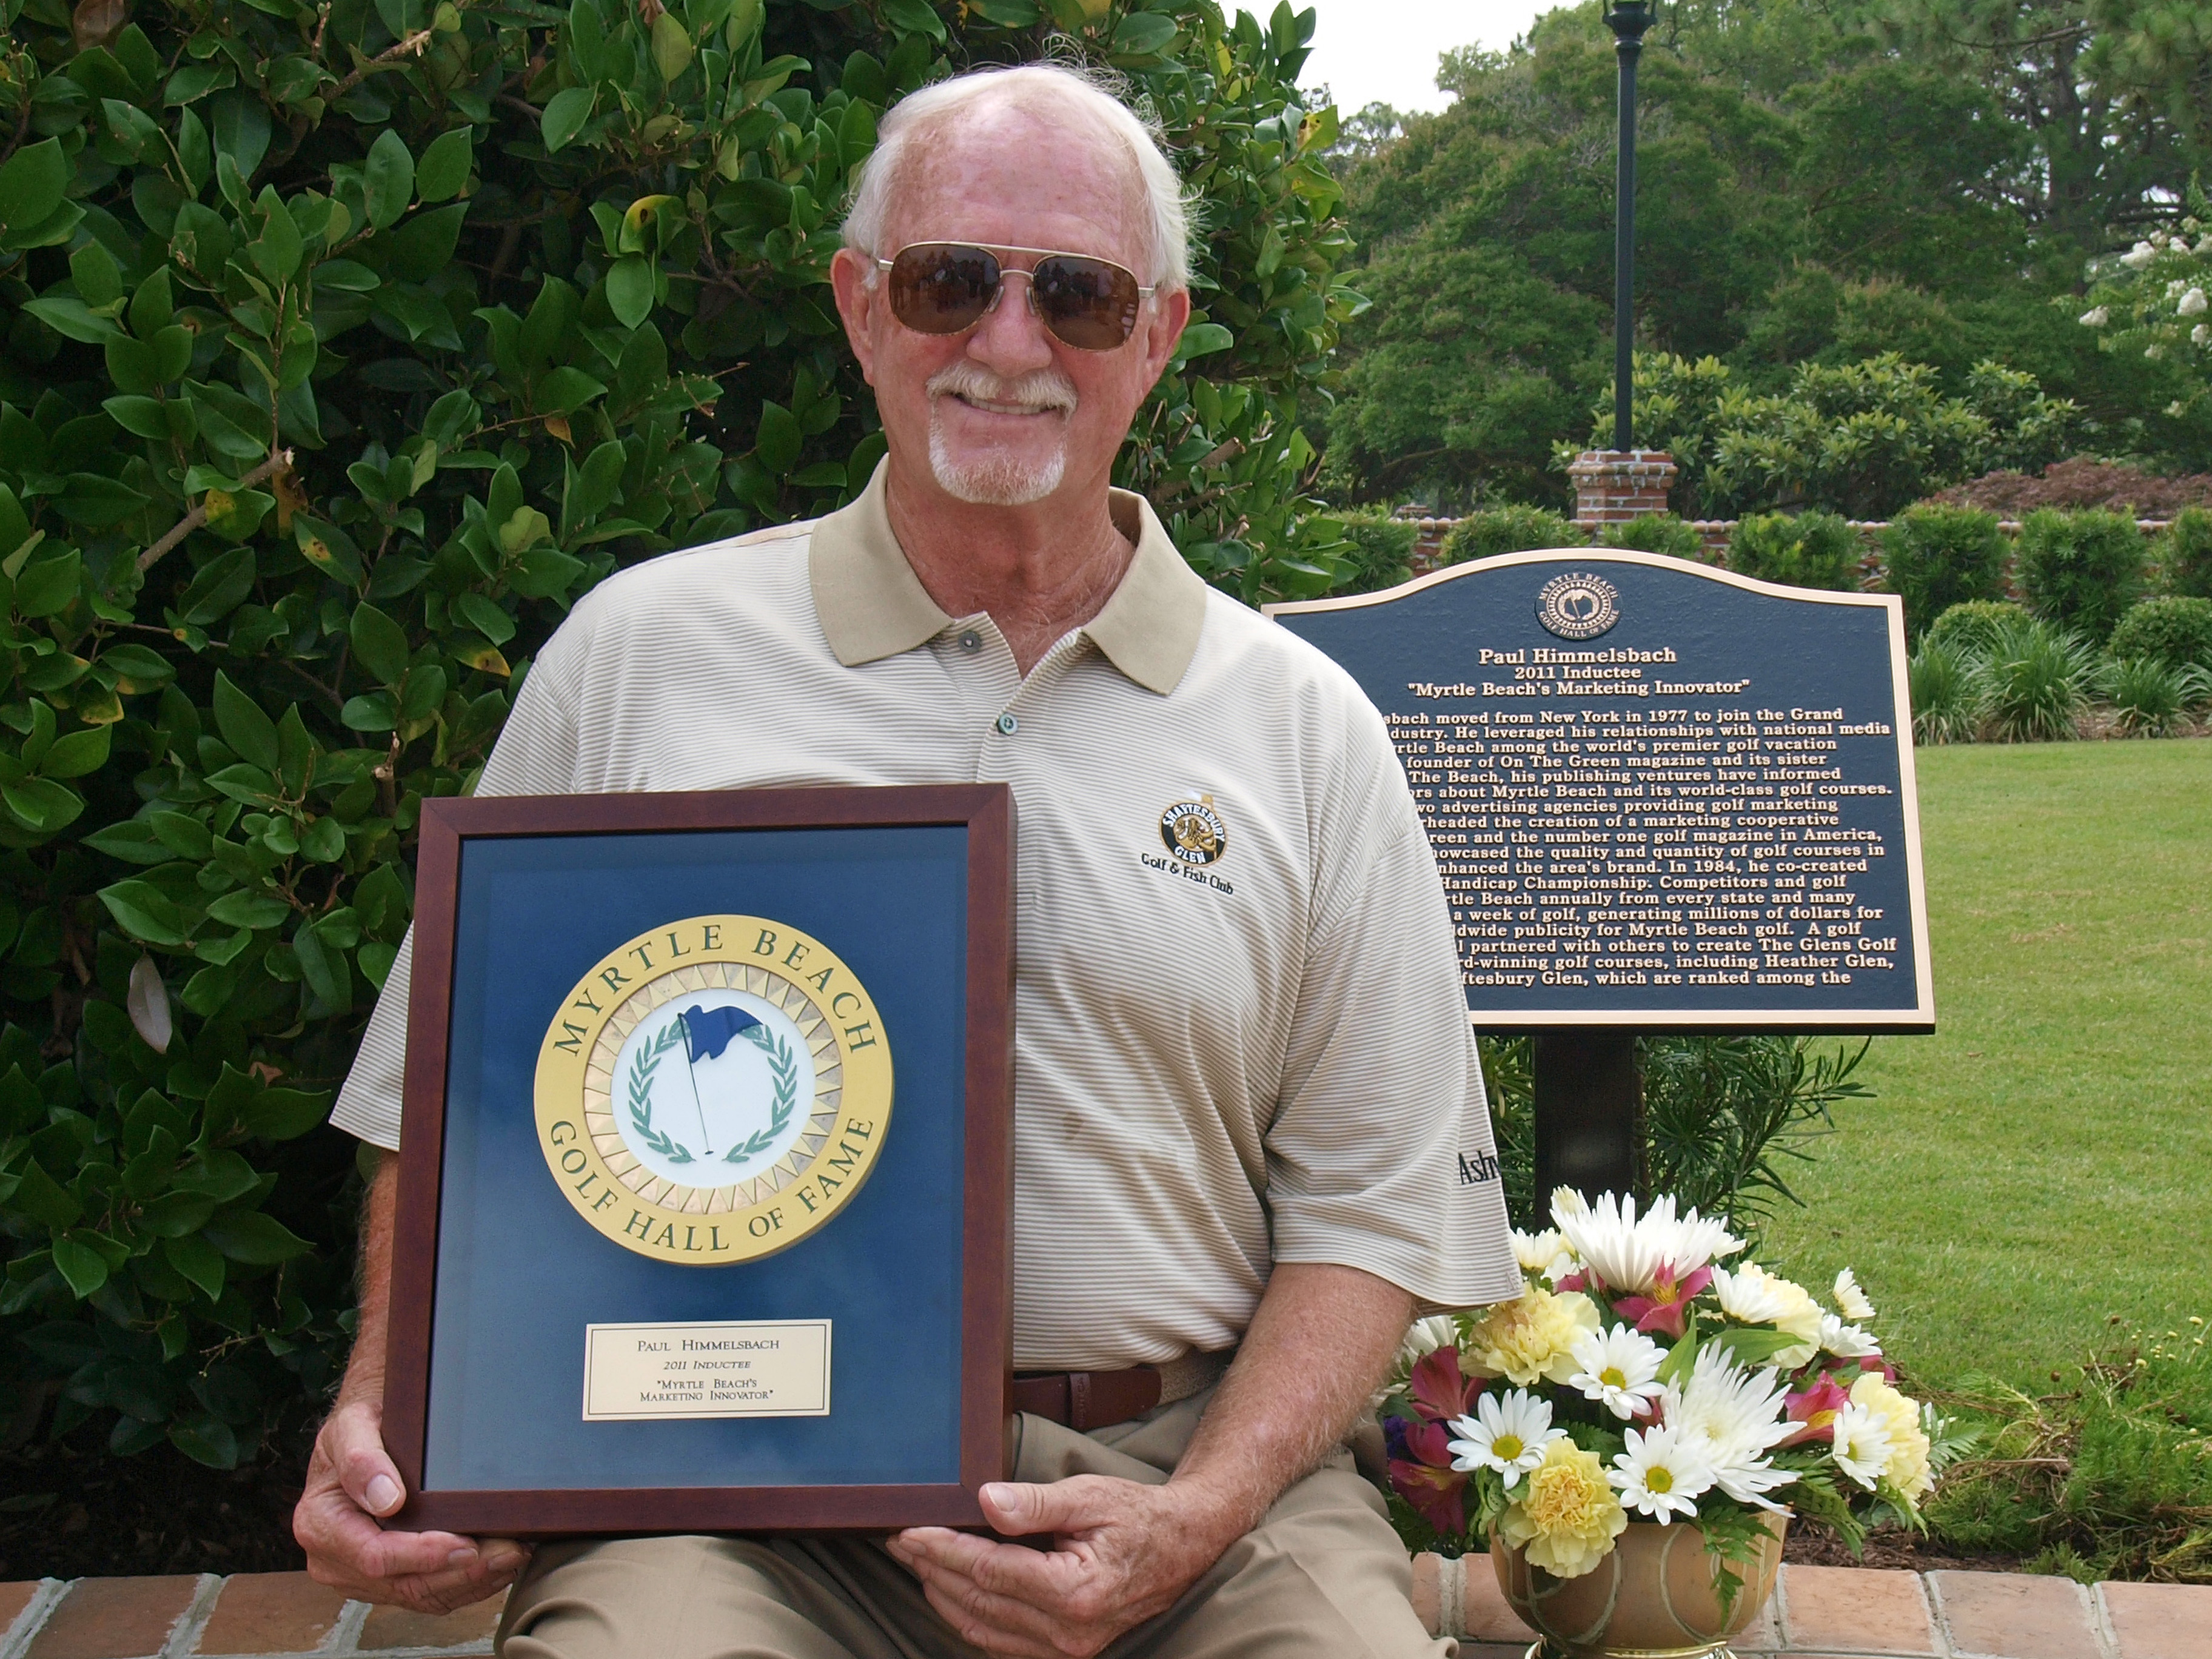 Myrtle Beach Golf Hall Of Fame Inducts Two Industry Leaders Who Helped